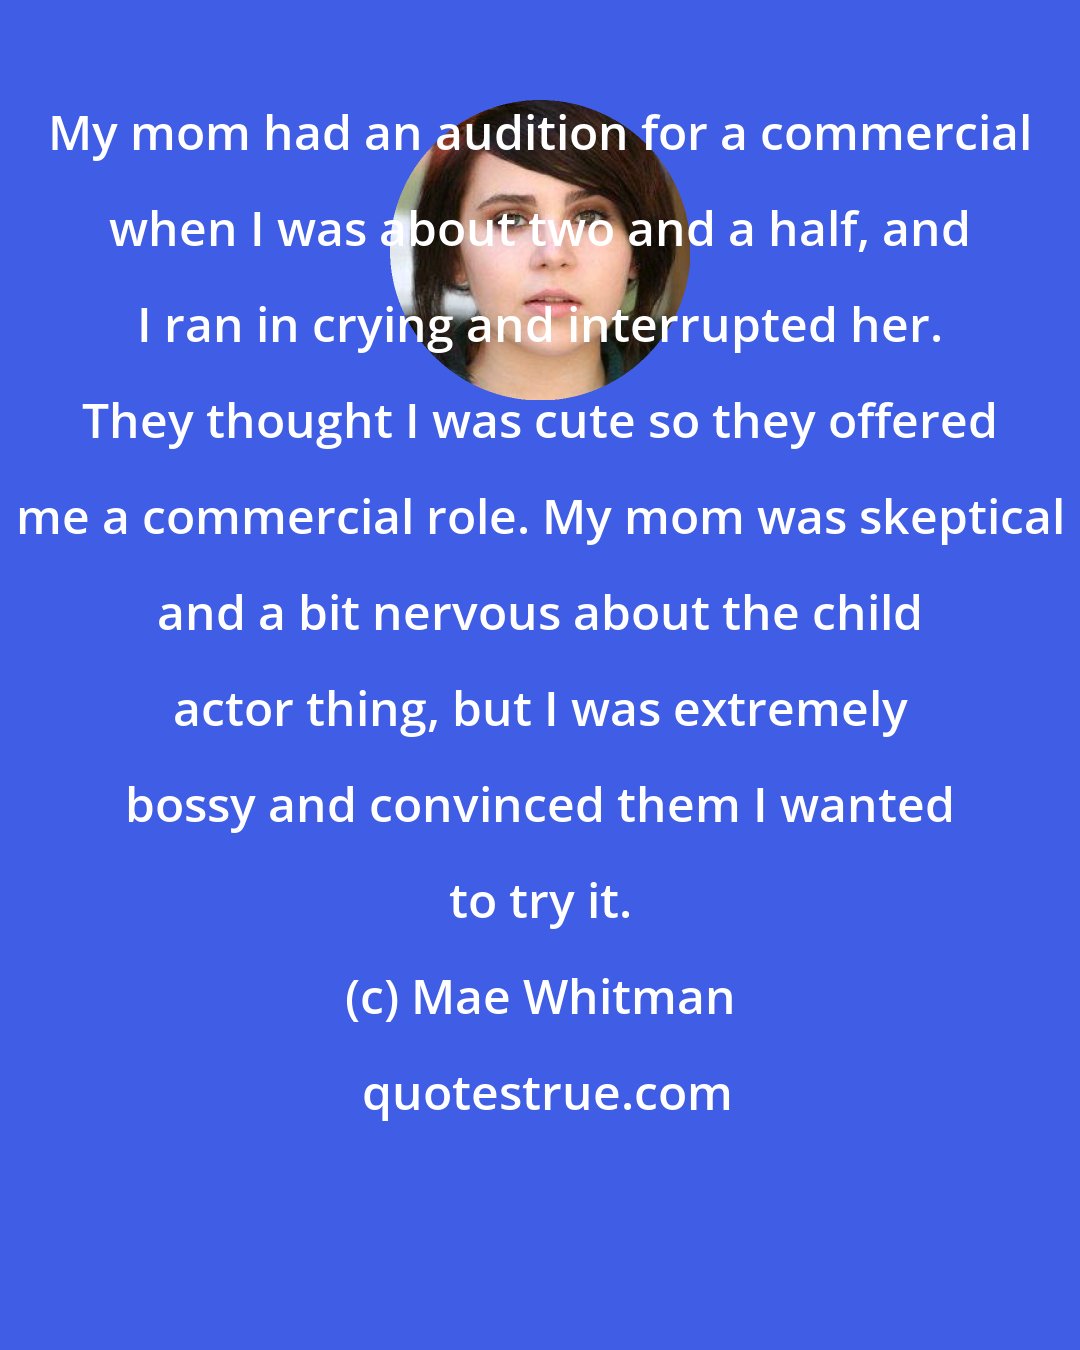 Mae Whitman: My mom had an audition for a commercial when I was about two and a half, and I ran in crying and interrupted her. They thought I was cute so they offered me a commercial role. My mom was skeptical and a bit nervous about the child actor thing, but I was extremely bossy and convinced them I wanted to try it.